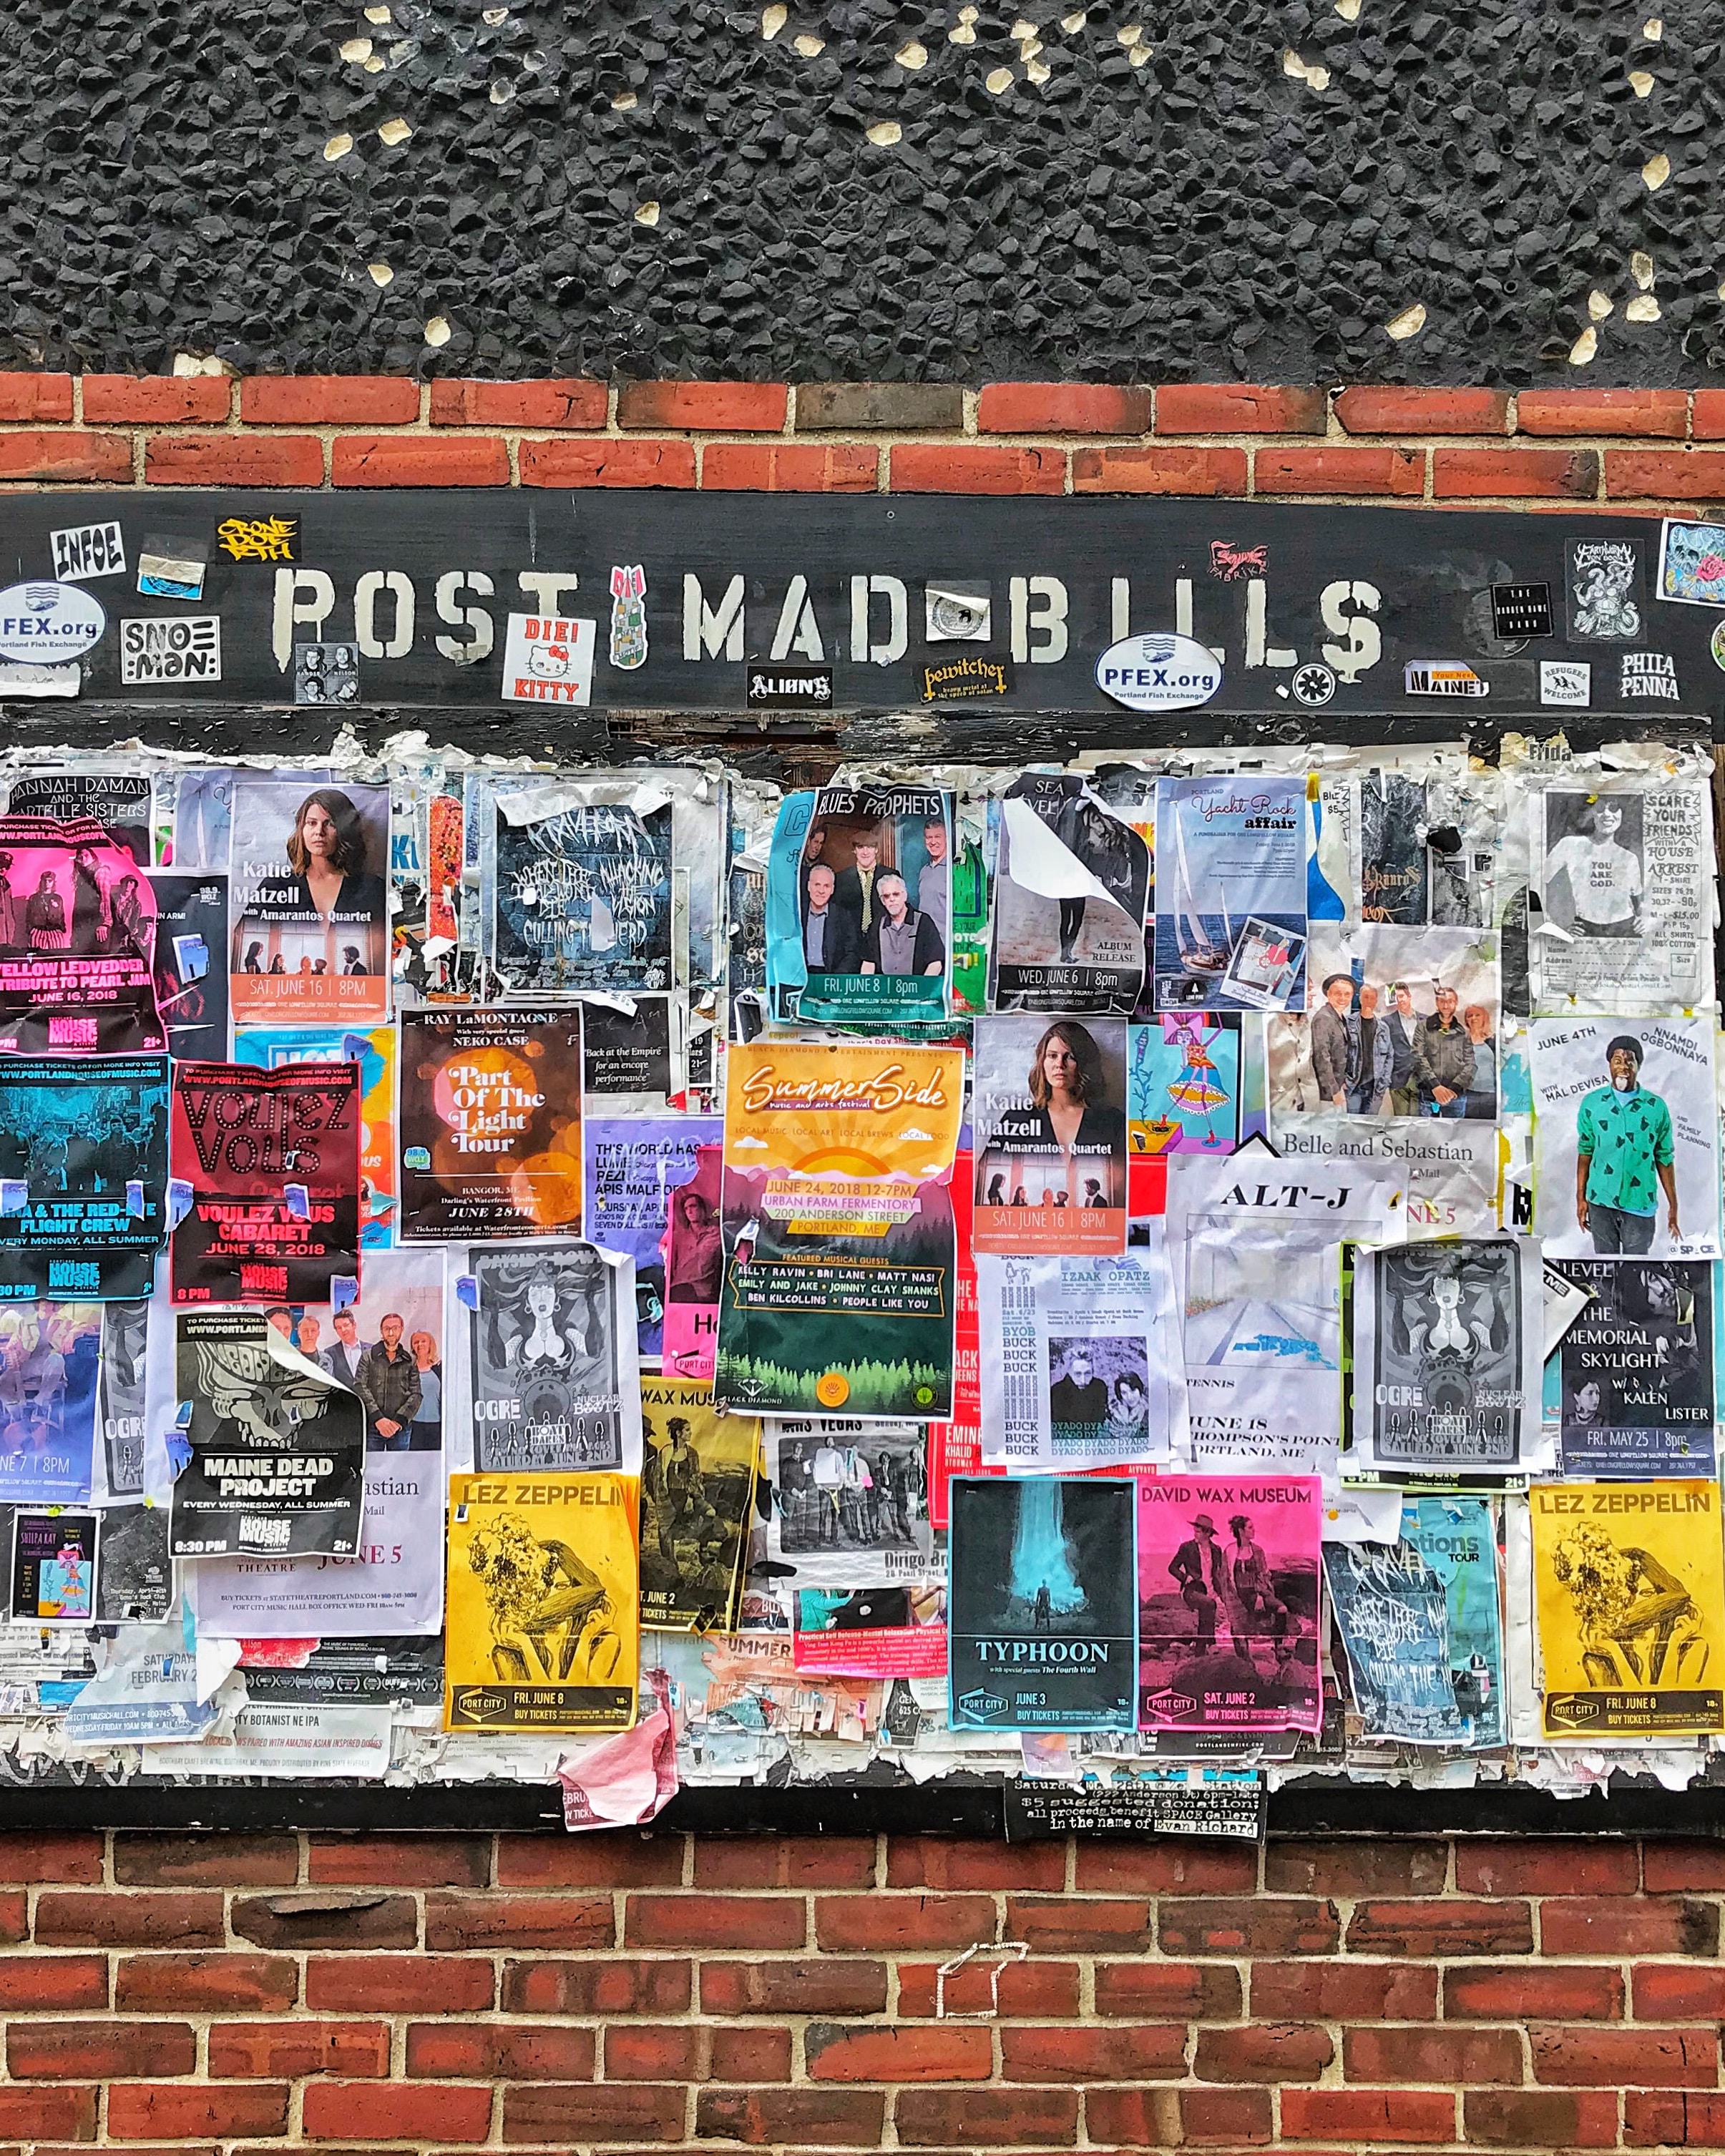 Image of wall with Ads